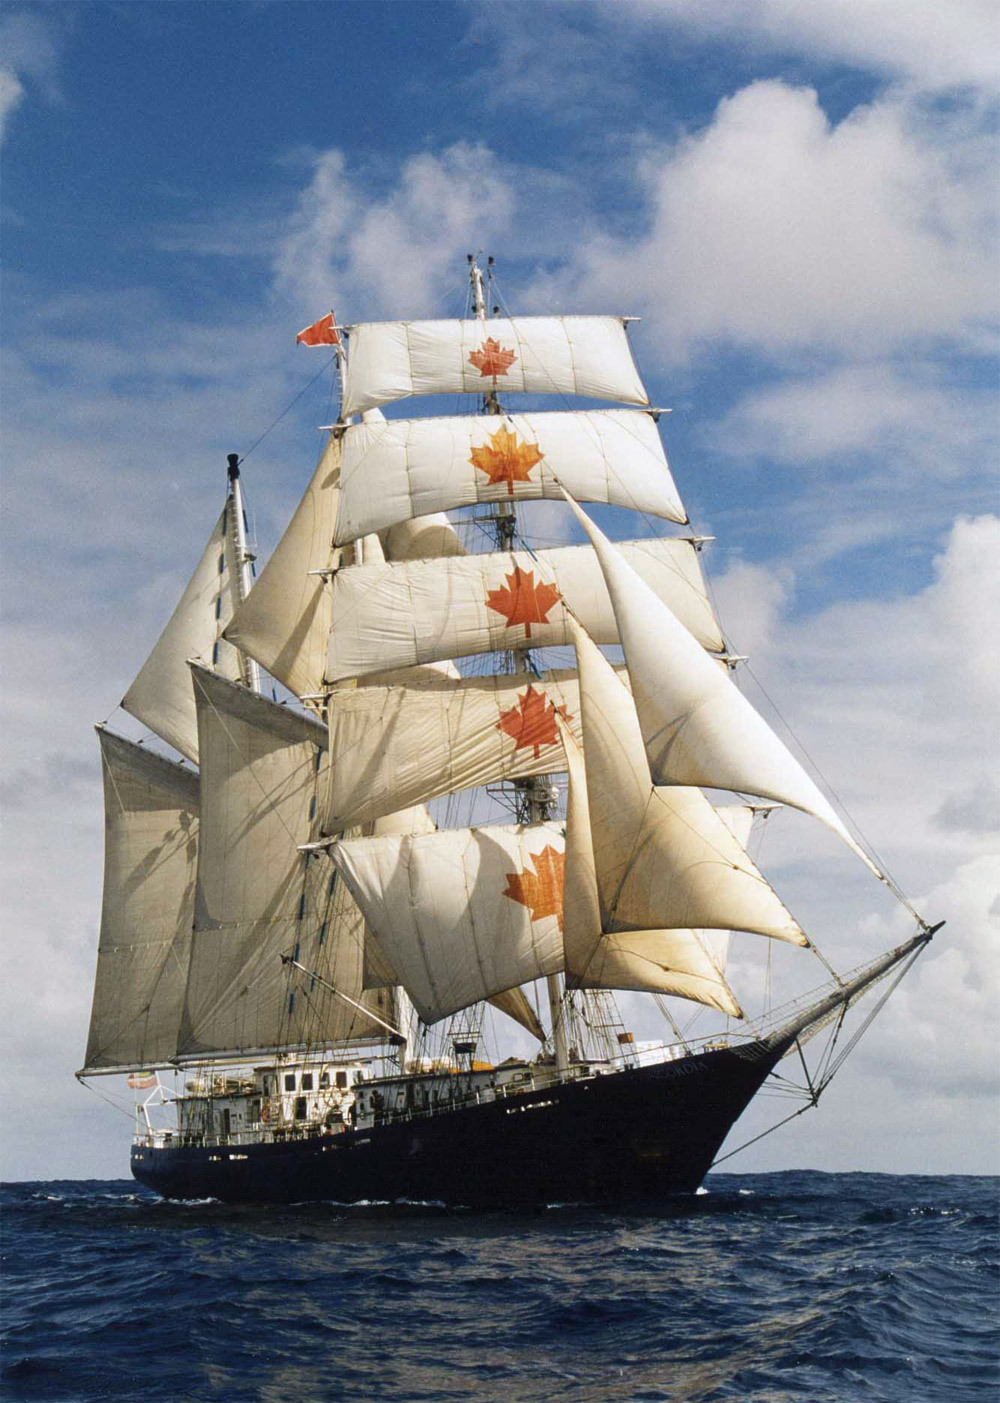 carolleevandyk:
This beautiful ship Concordia was built in Poland in 1992 for the West Island College in Montreal, Canada. She served as a sail training ship: her hull was made of steel and she was rigged as a schooner barque. 
Too bad it sank due to freak-weather on 17 February 2010 somewhere southeast of Brazil.
